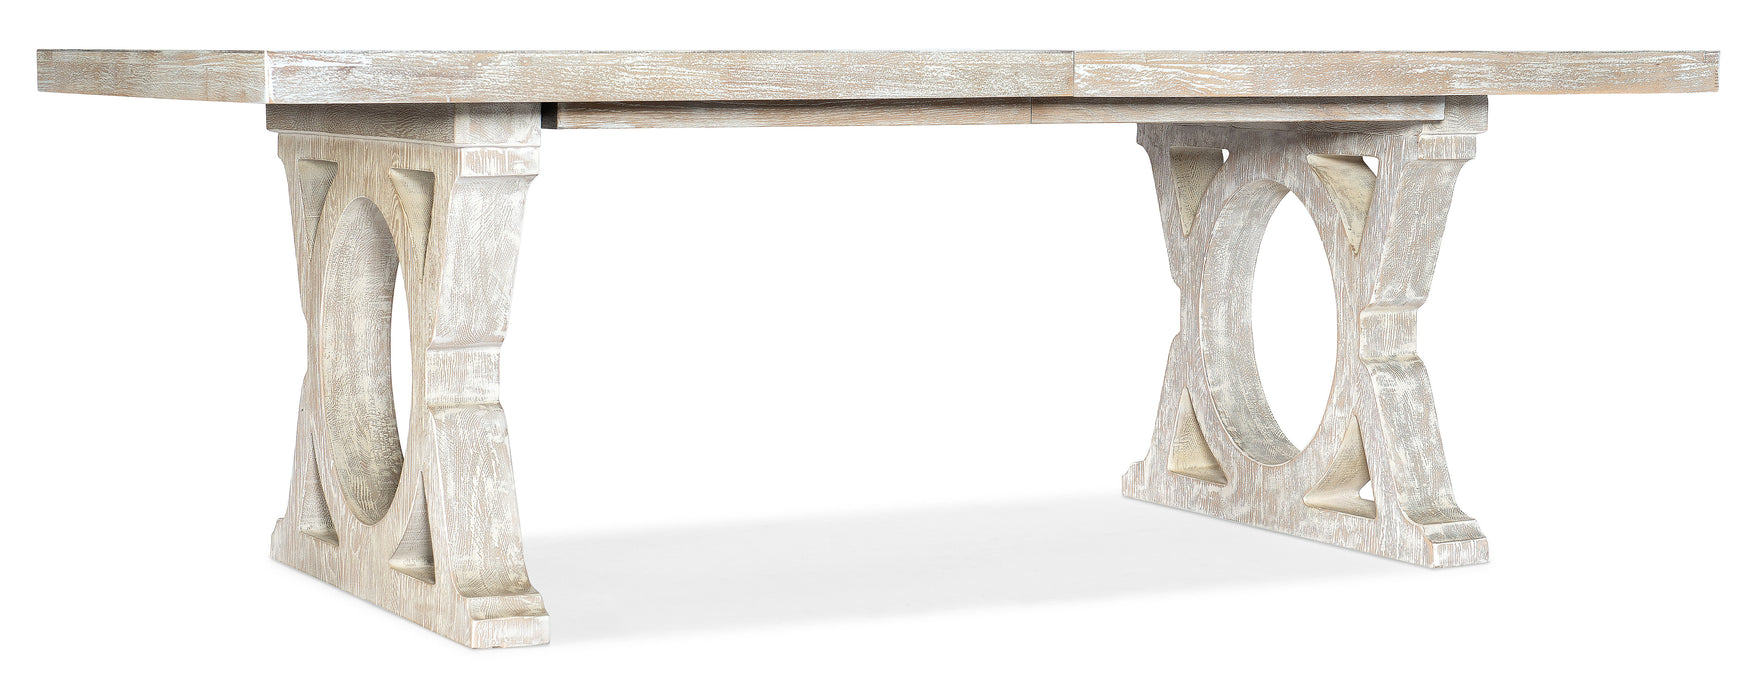 Serenity - Topsail Rectangle Dining Table With 2-18" Leaves